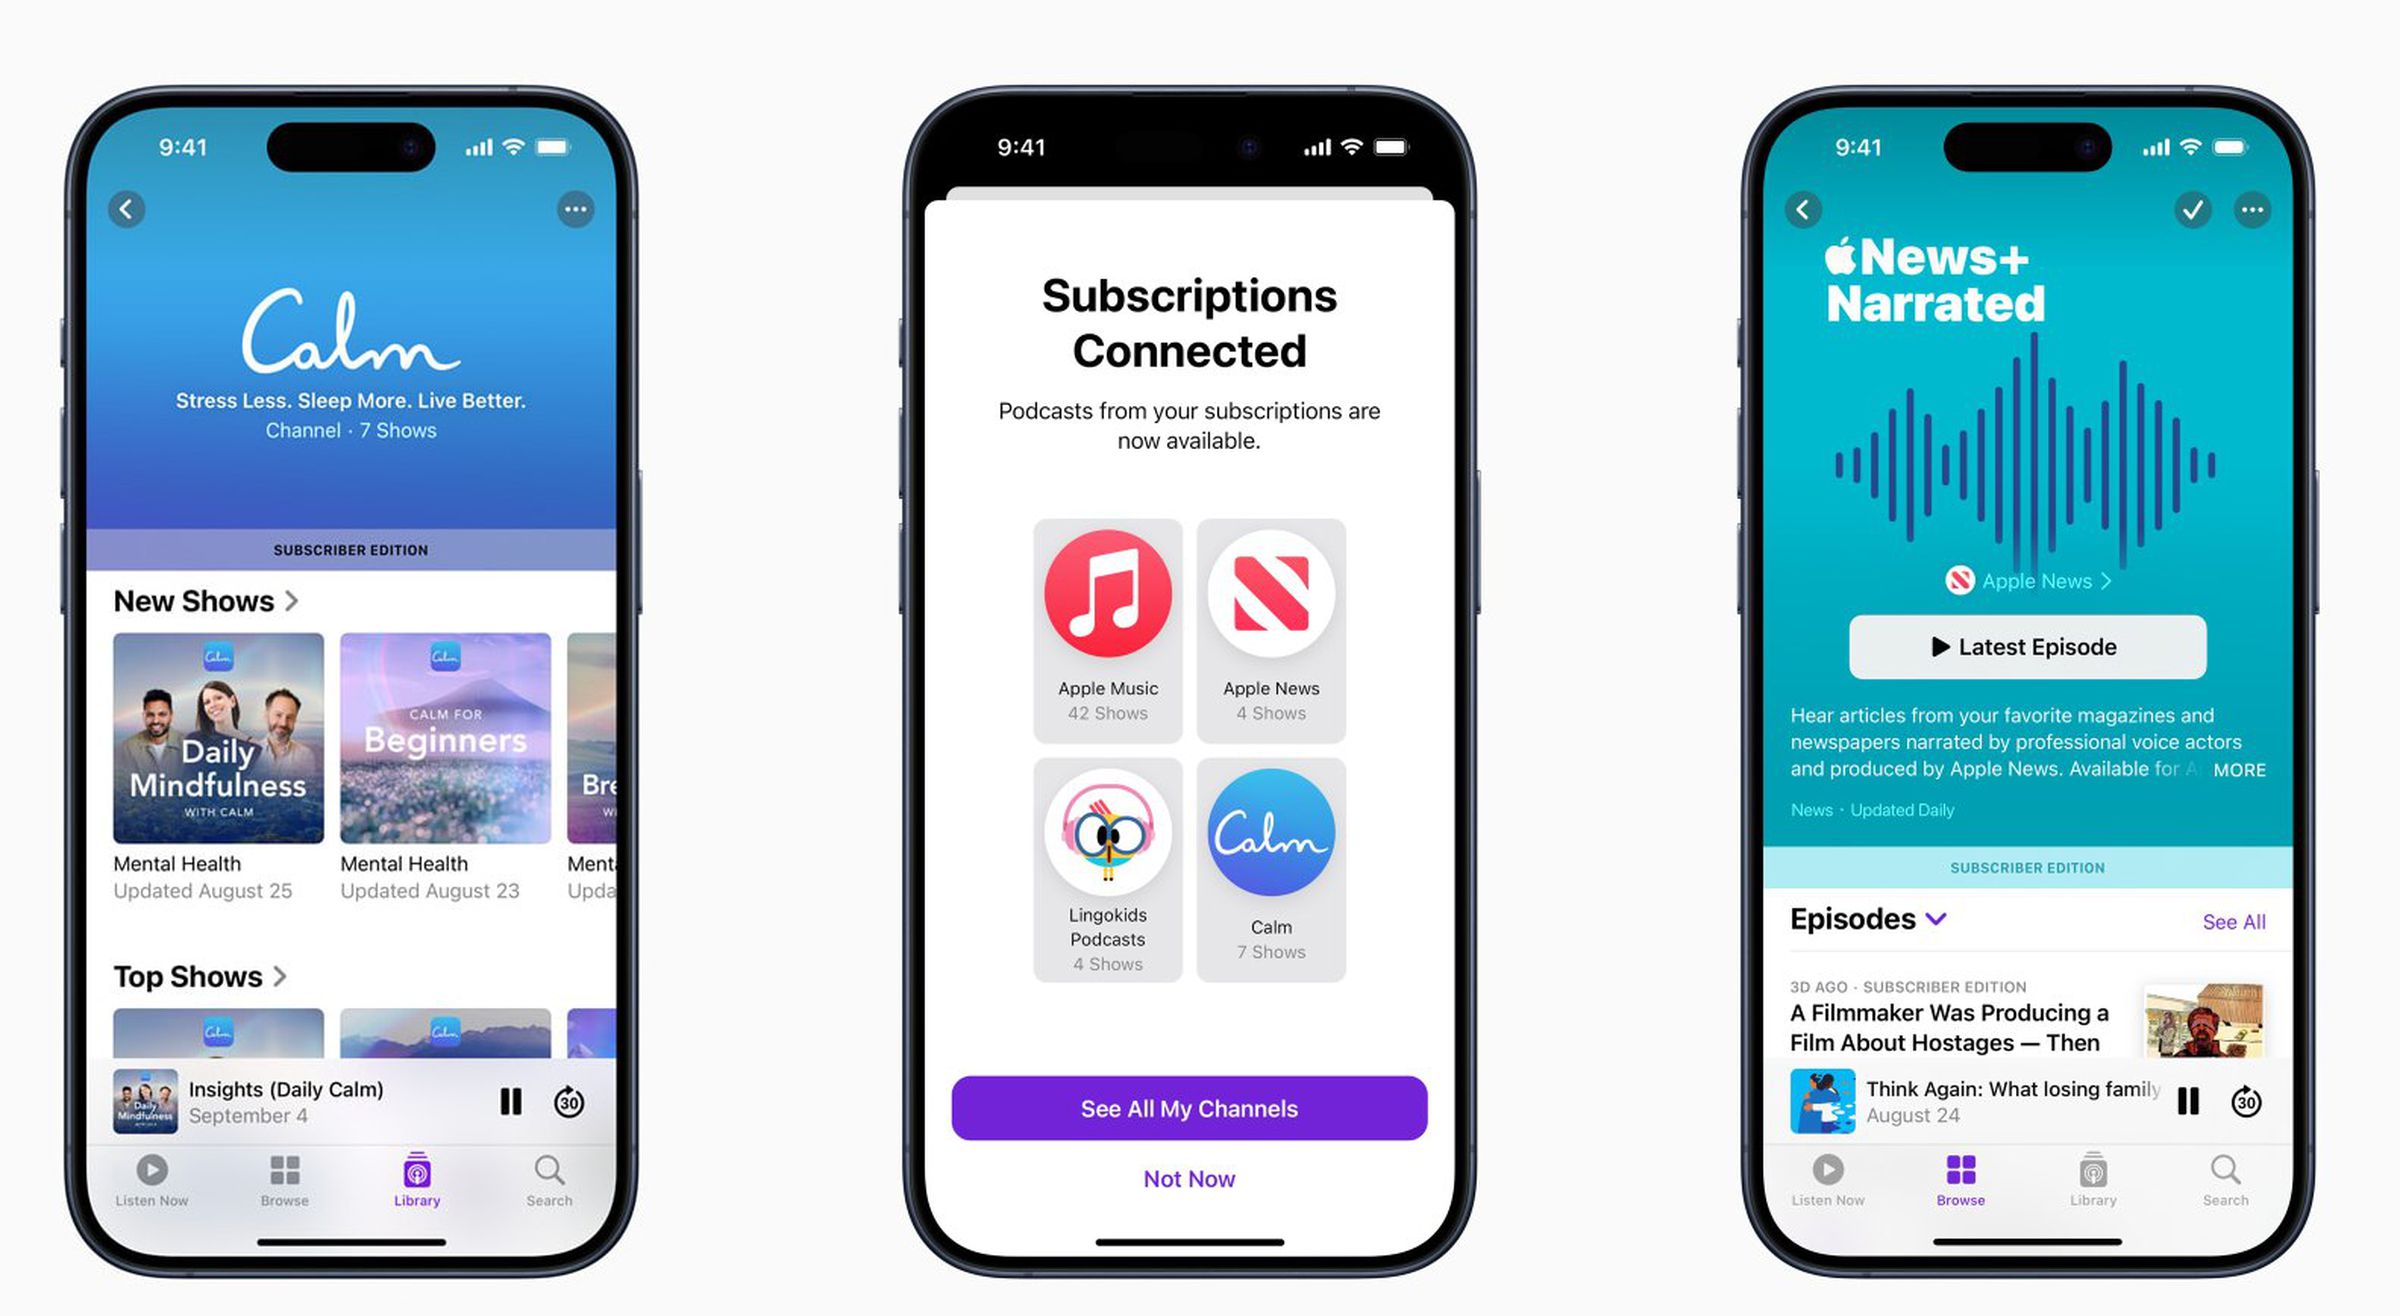 Simulated screenshots of the Apple Podcasts app showing the UI for Calm subscribers, what it looks like to connect your third-party subscriptions, and the News+ Narrated experience.